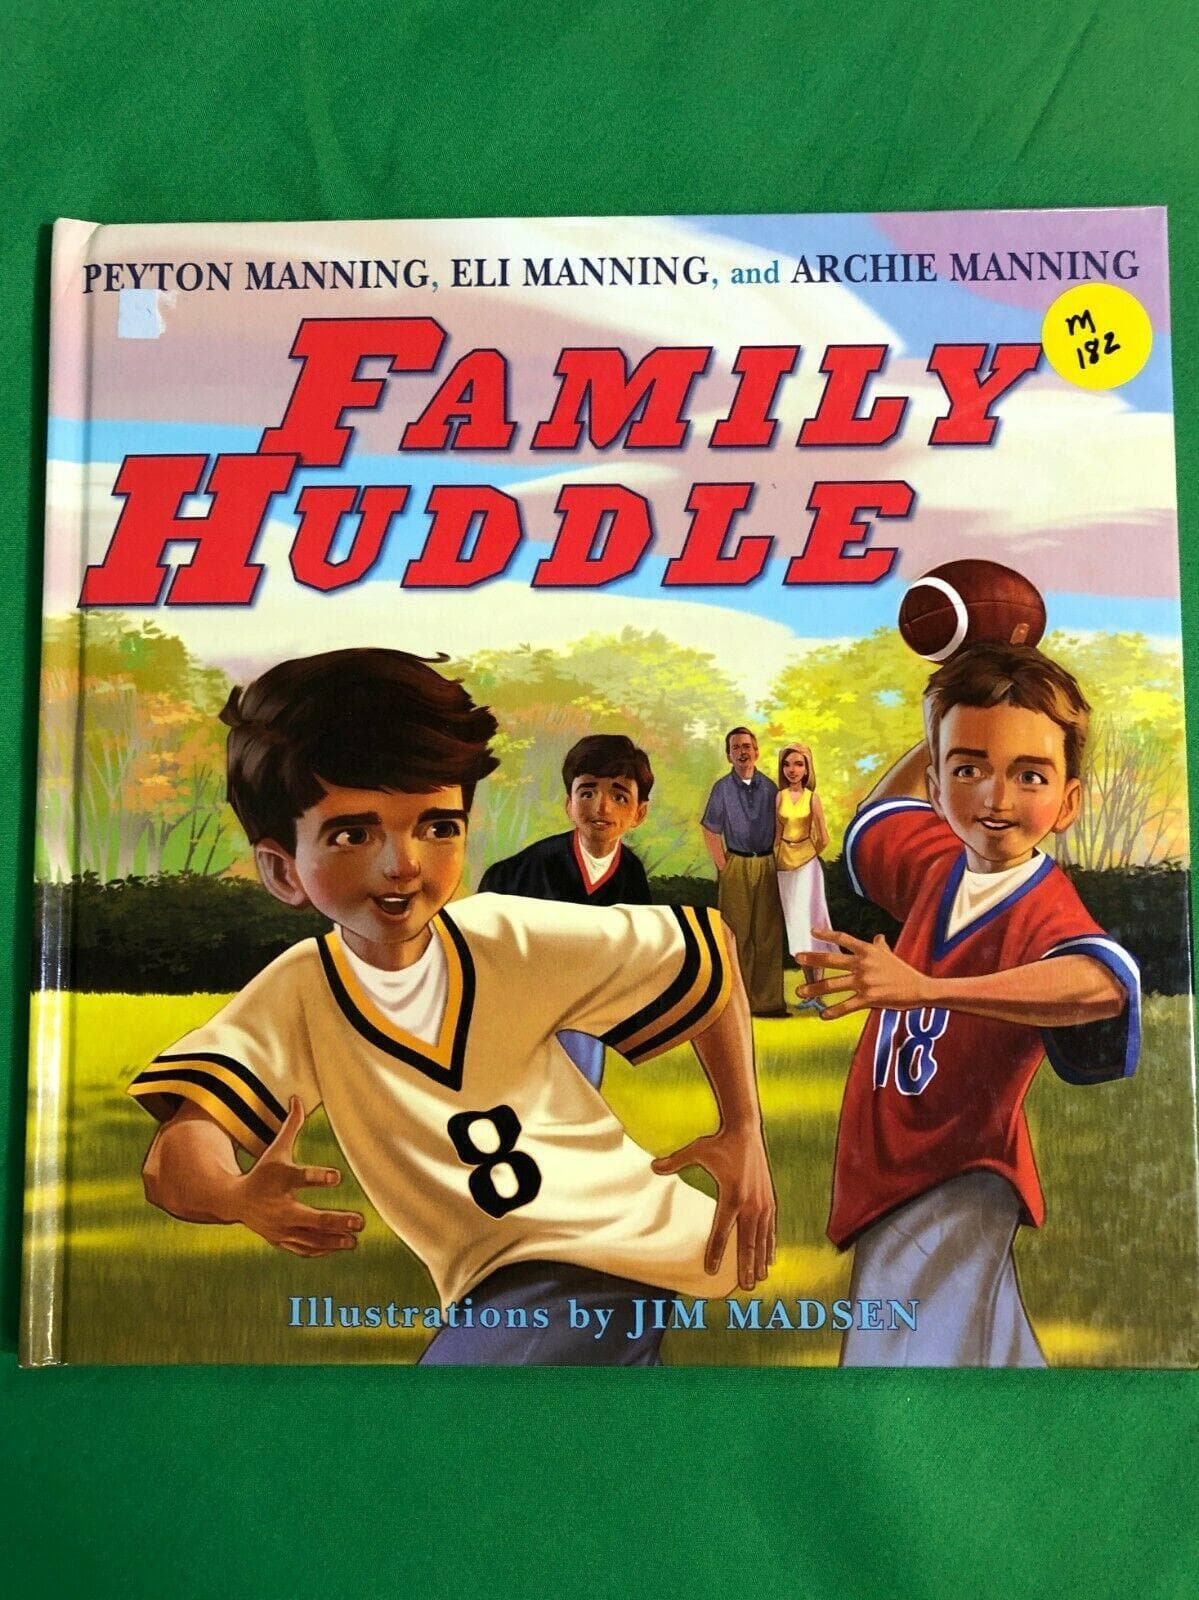 NFL "Family Huddle" Book by Peyton, Eli, and Archie Manning